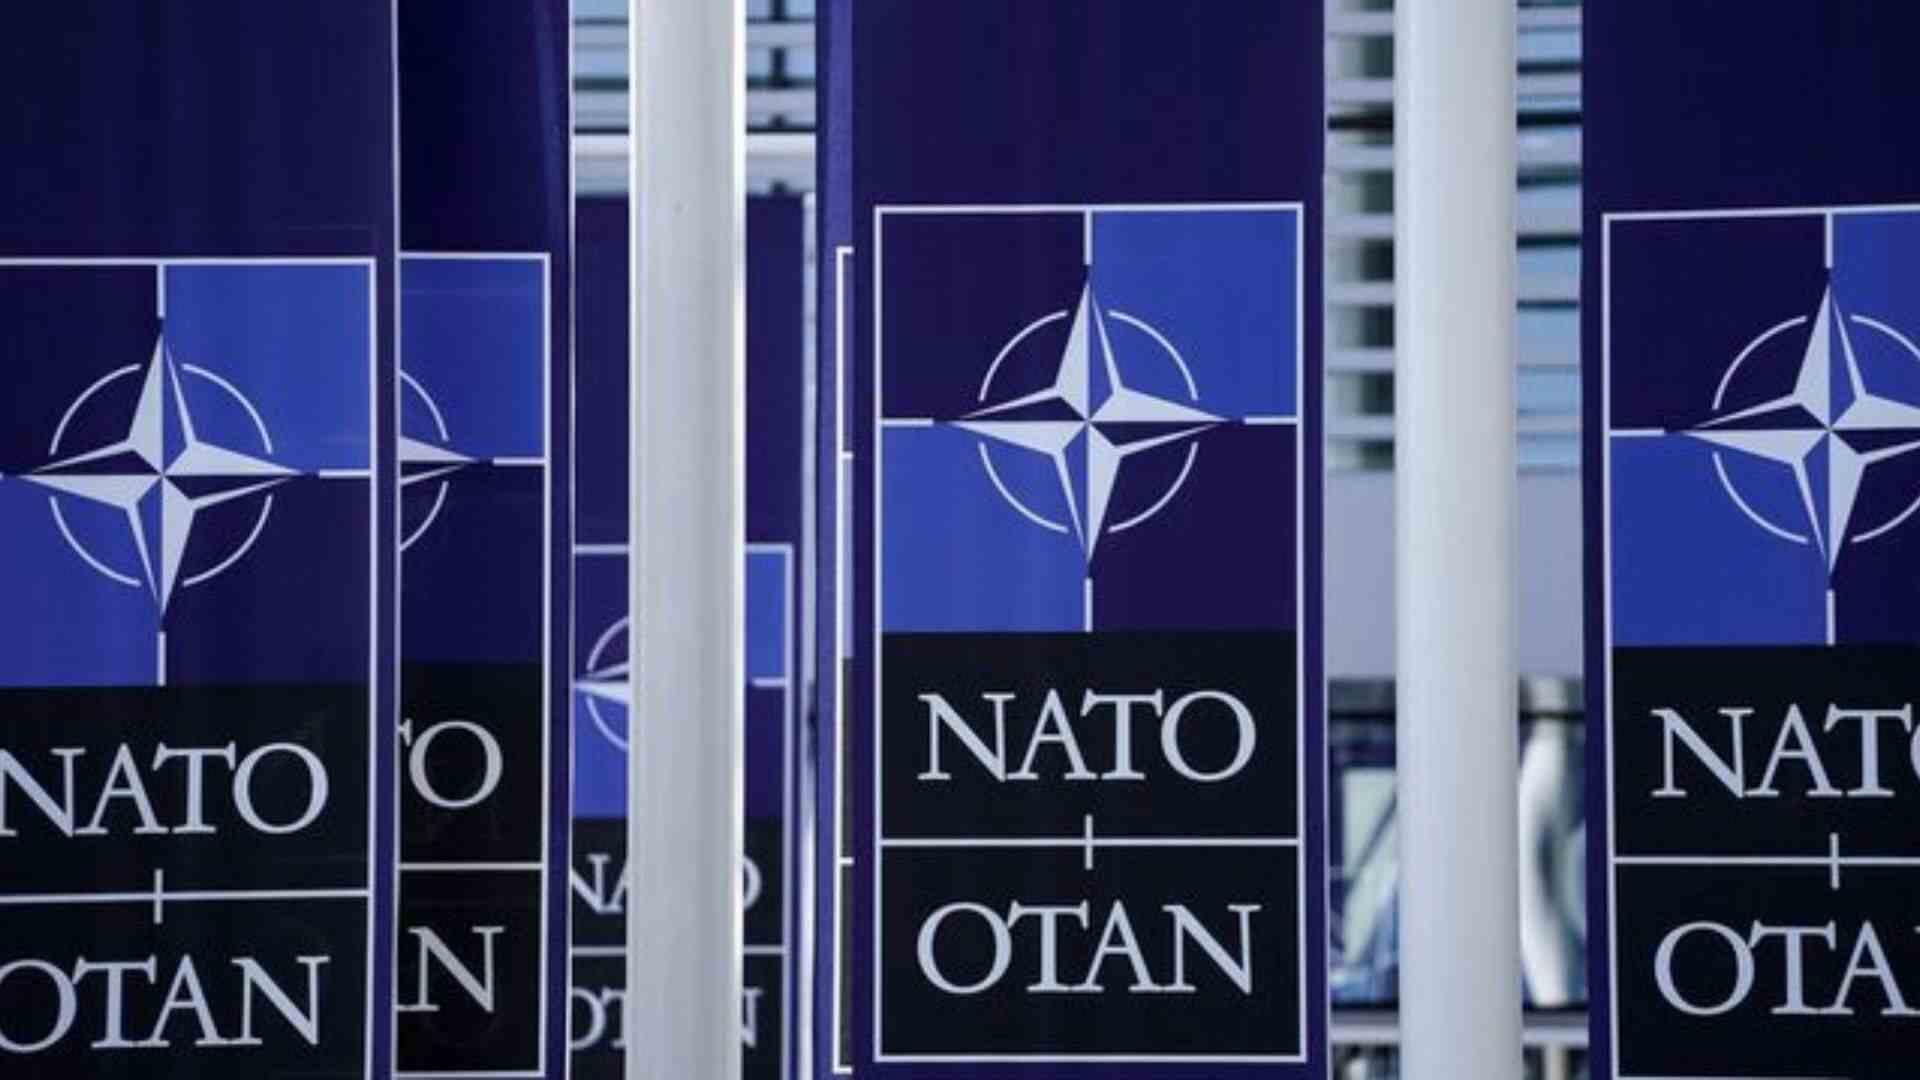 NATO Requires 35-50 Extra Brigades To Counter Russian Threats